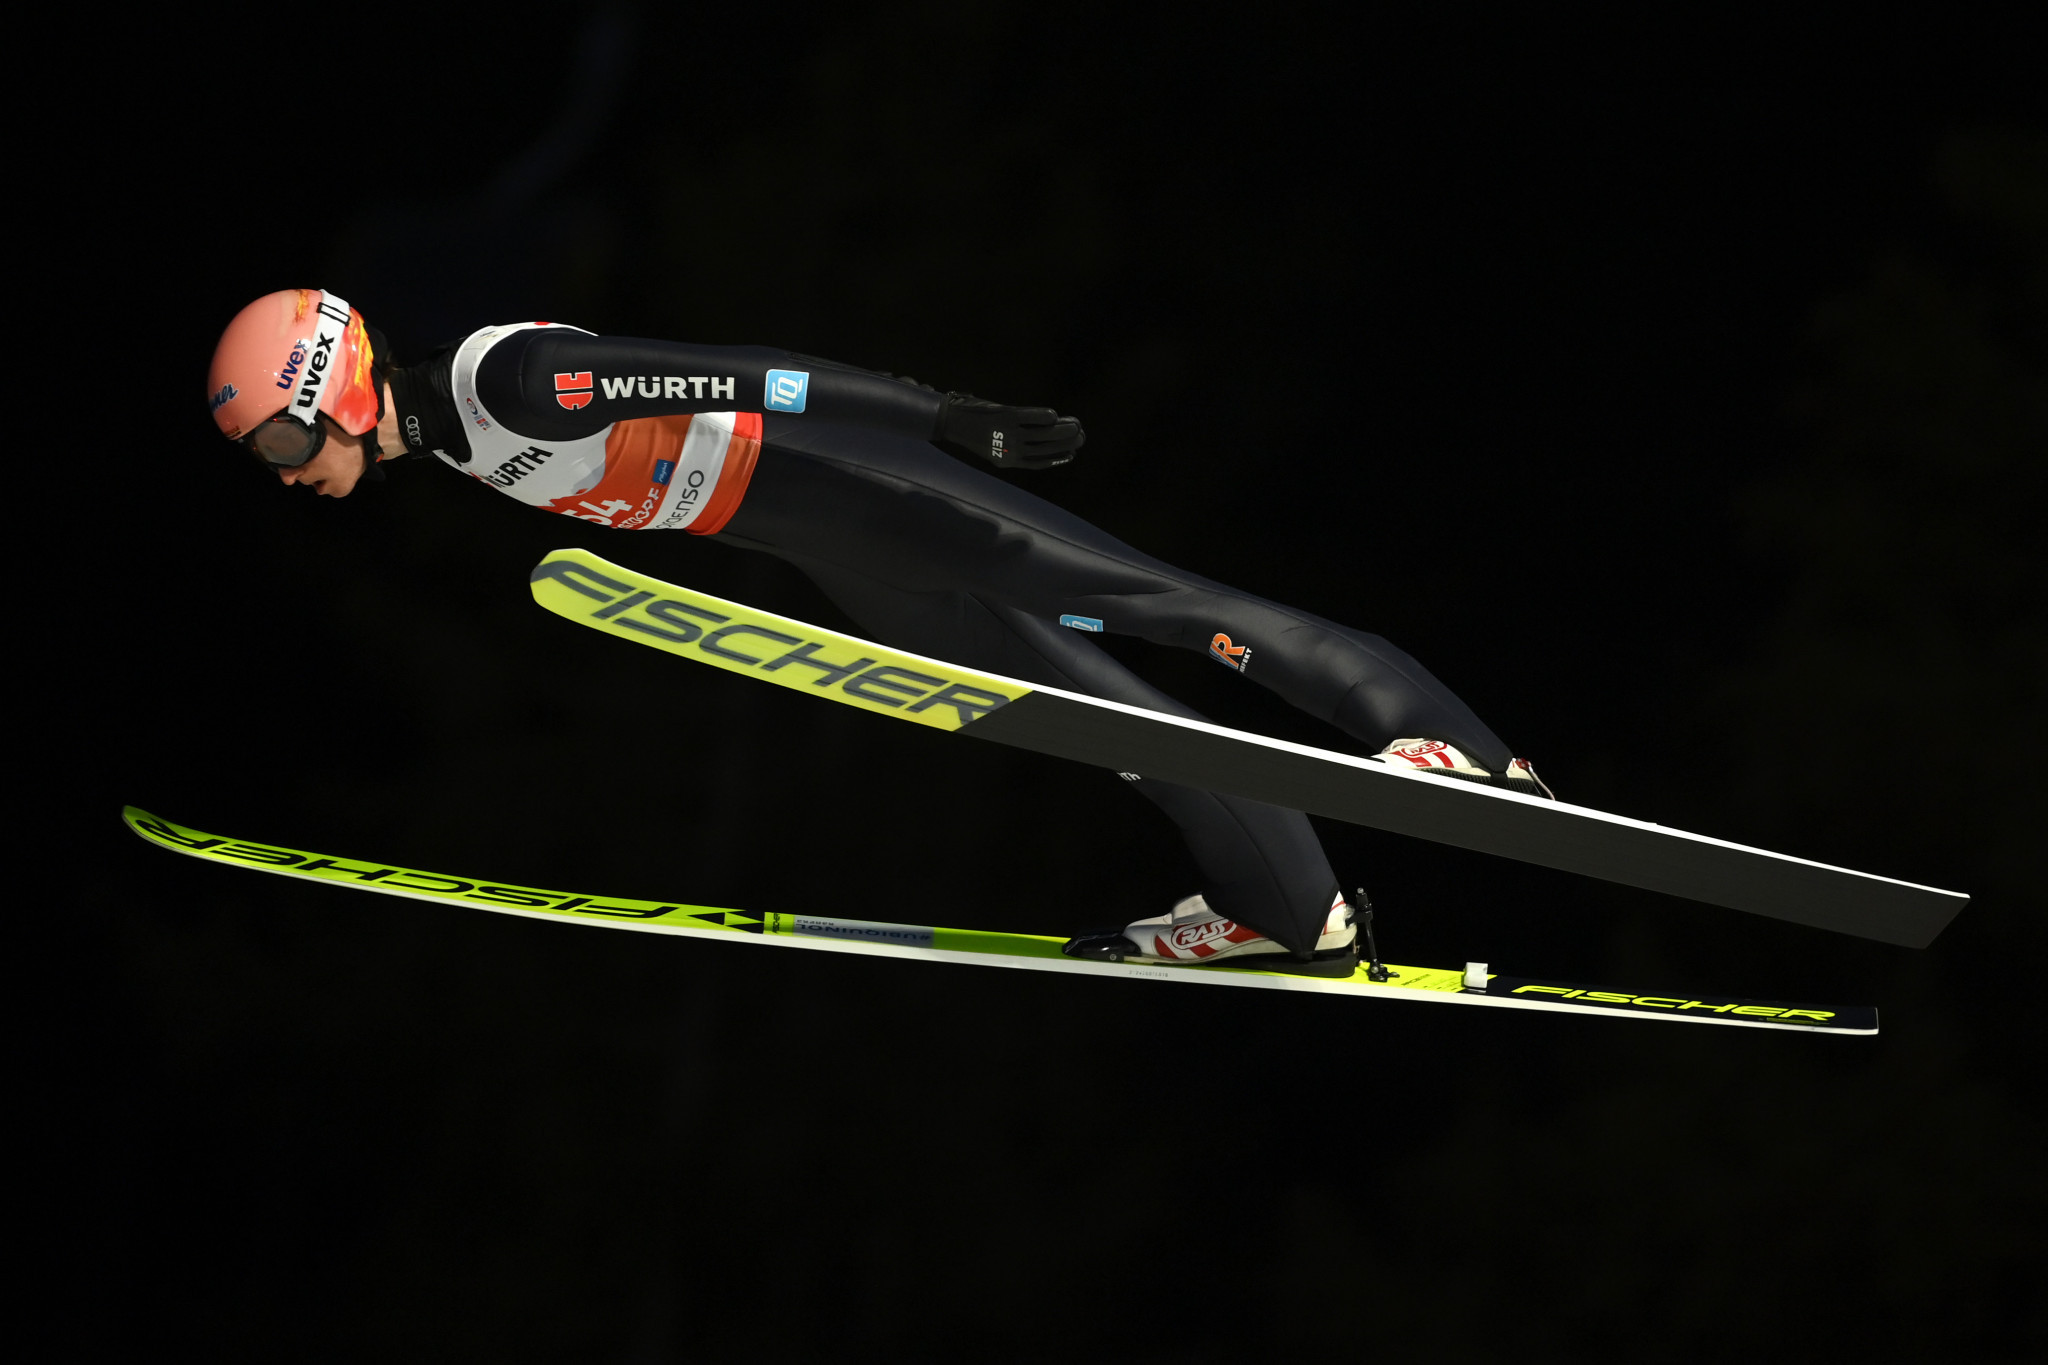 Germany's Karl Geiger tops the men's FIS Ski Jumping World Cup standings after five events ©Getty Images